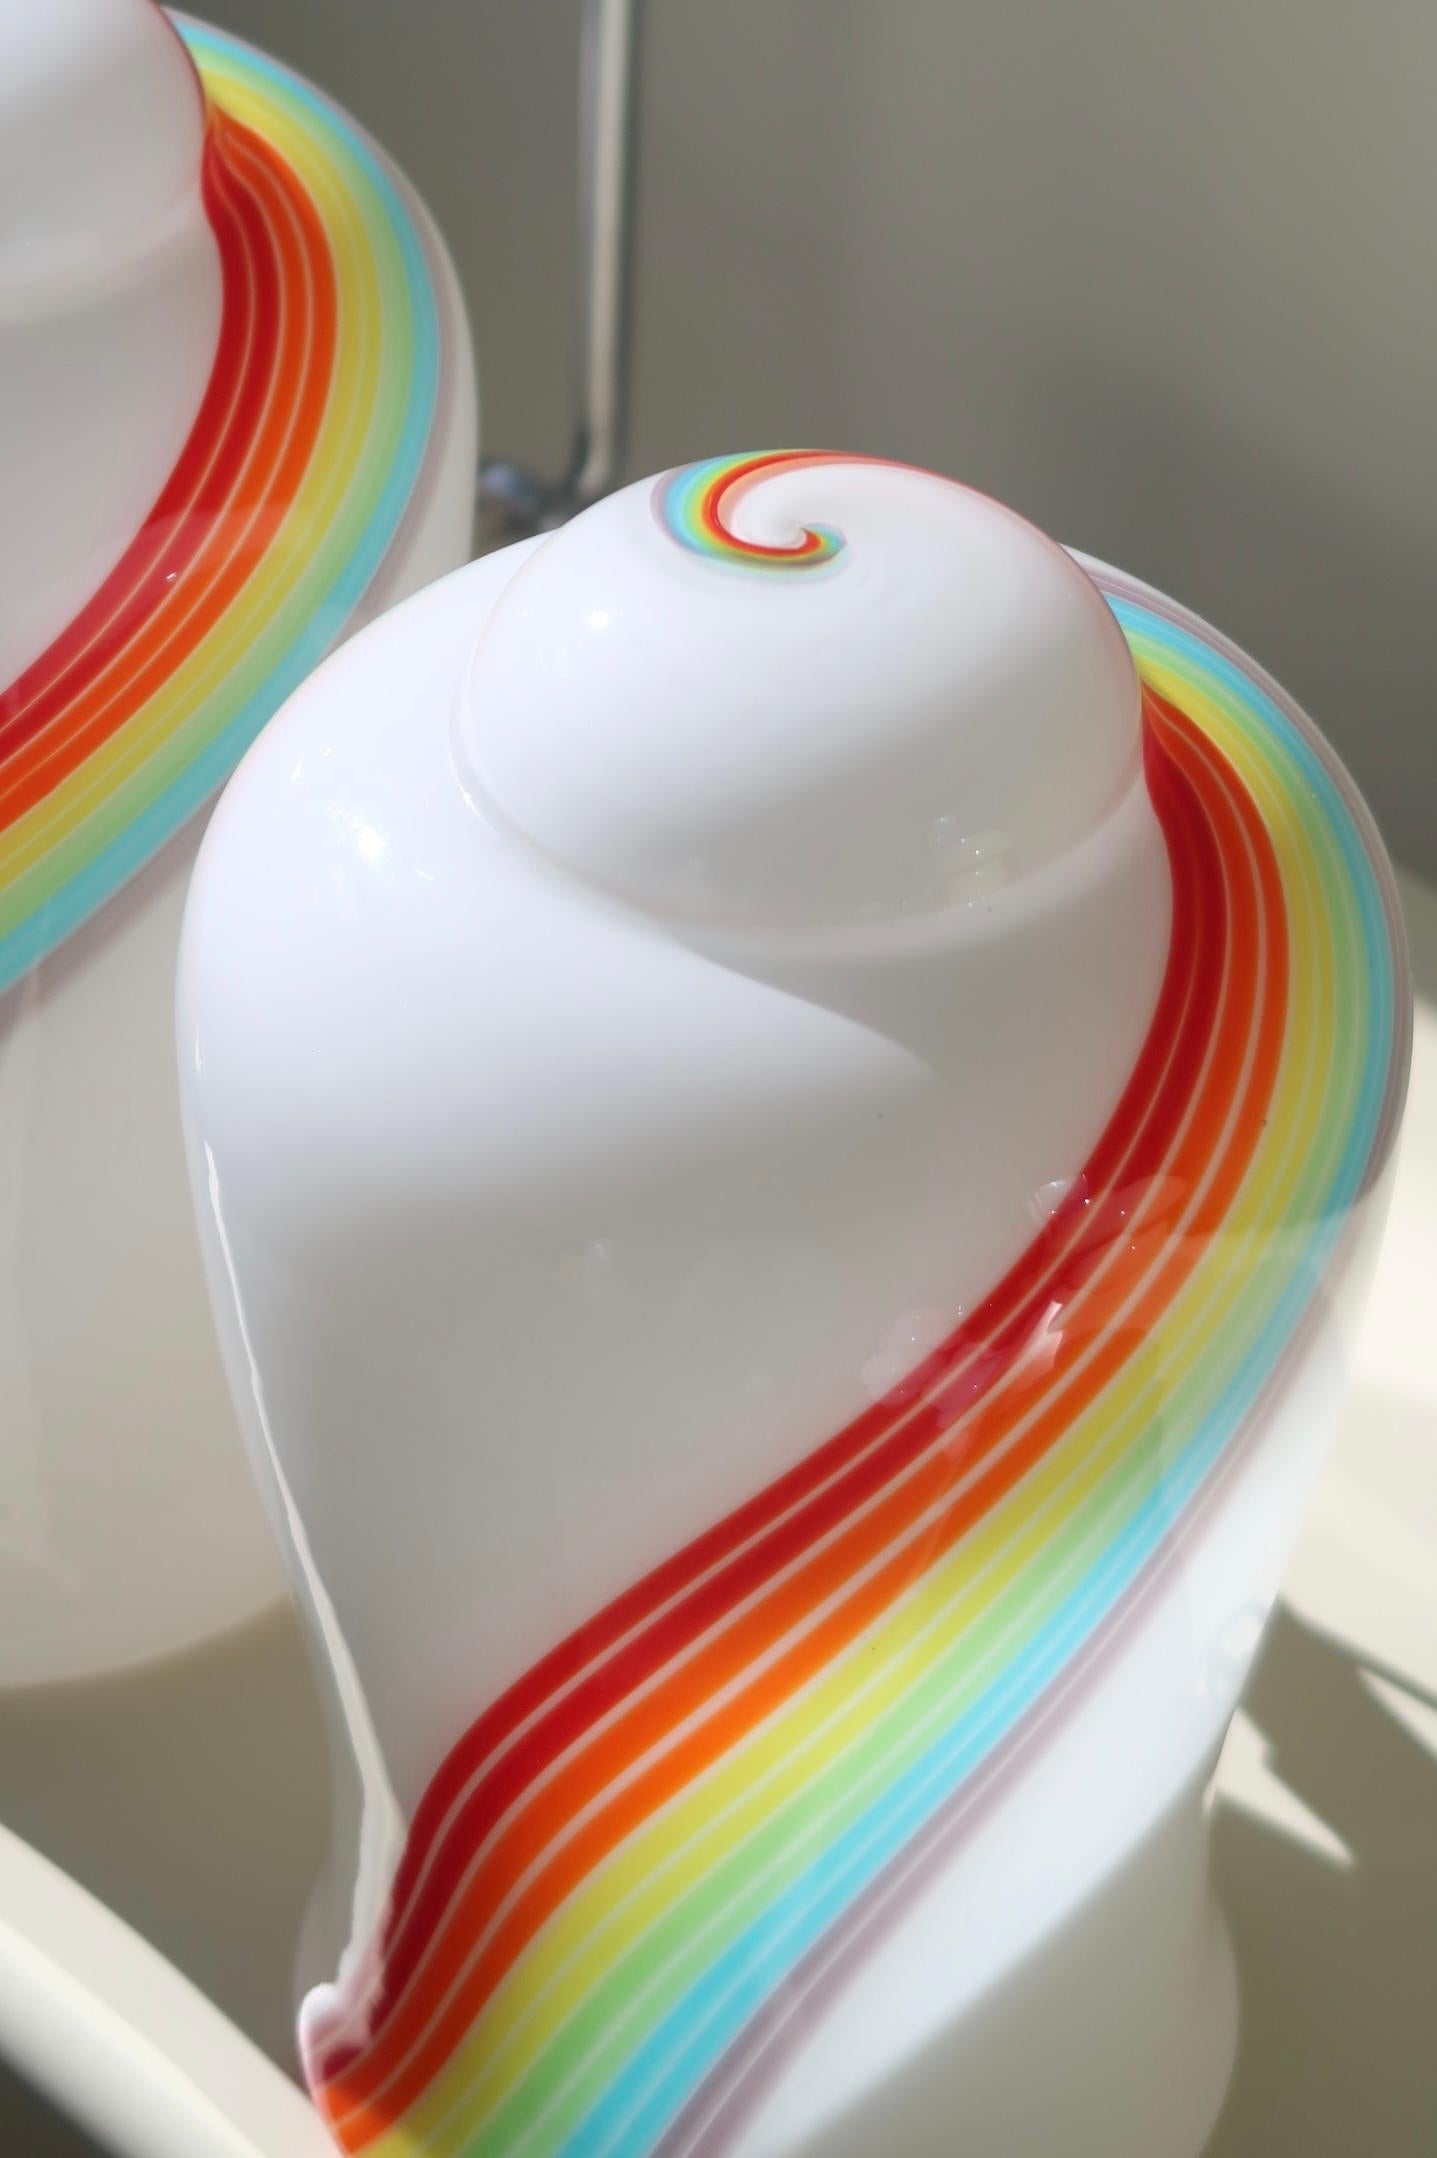 Vintage Murano table lamp in a special shape with a rainbow swirl. The lamp is mouth-blown in one piece of glass. Handmade in Italy, 1970s. H:29 cm D:17 cm


